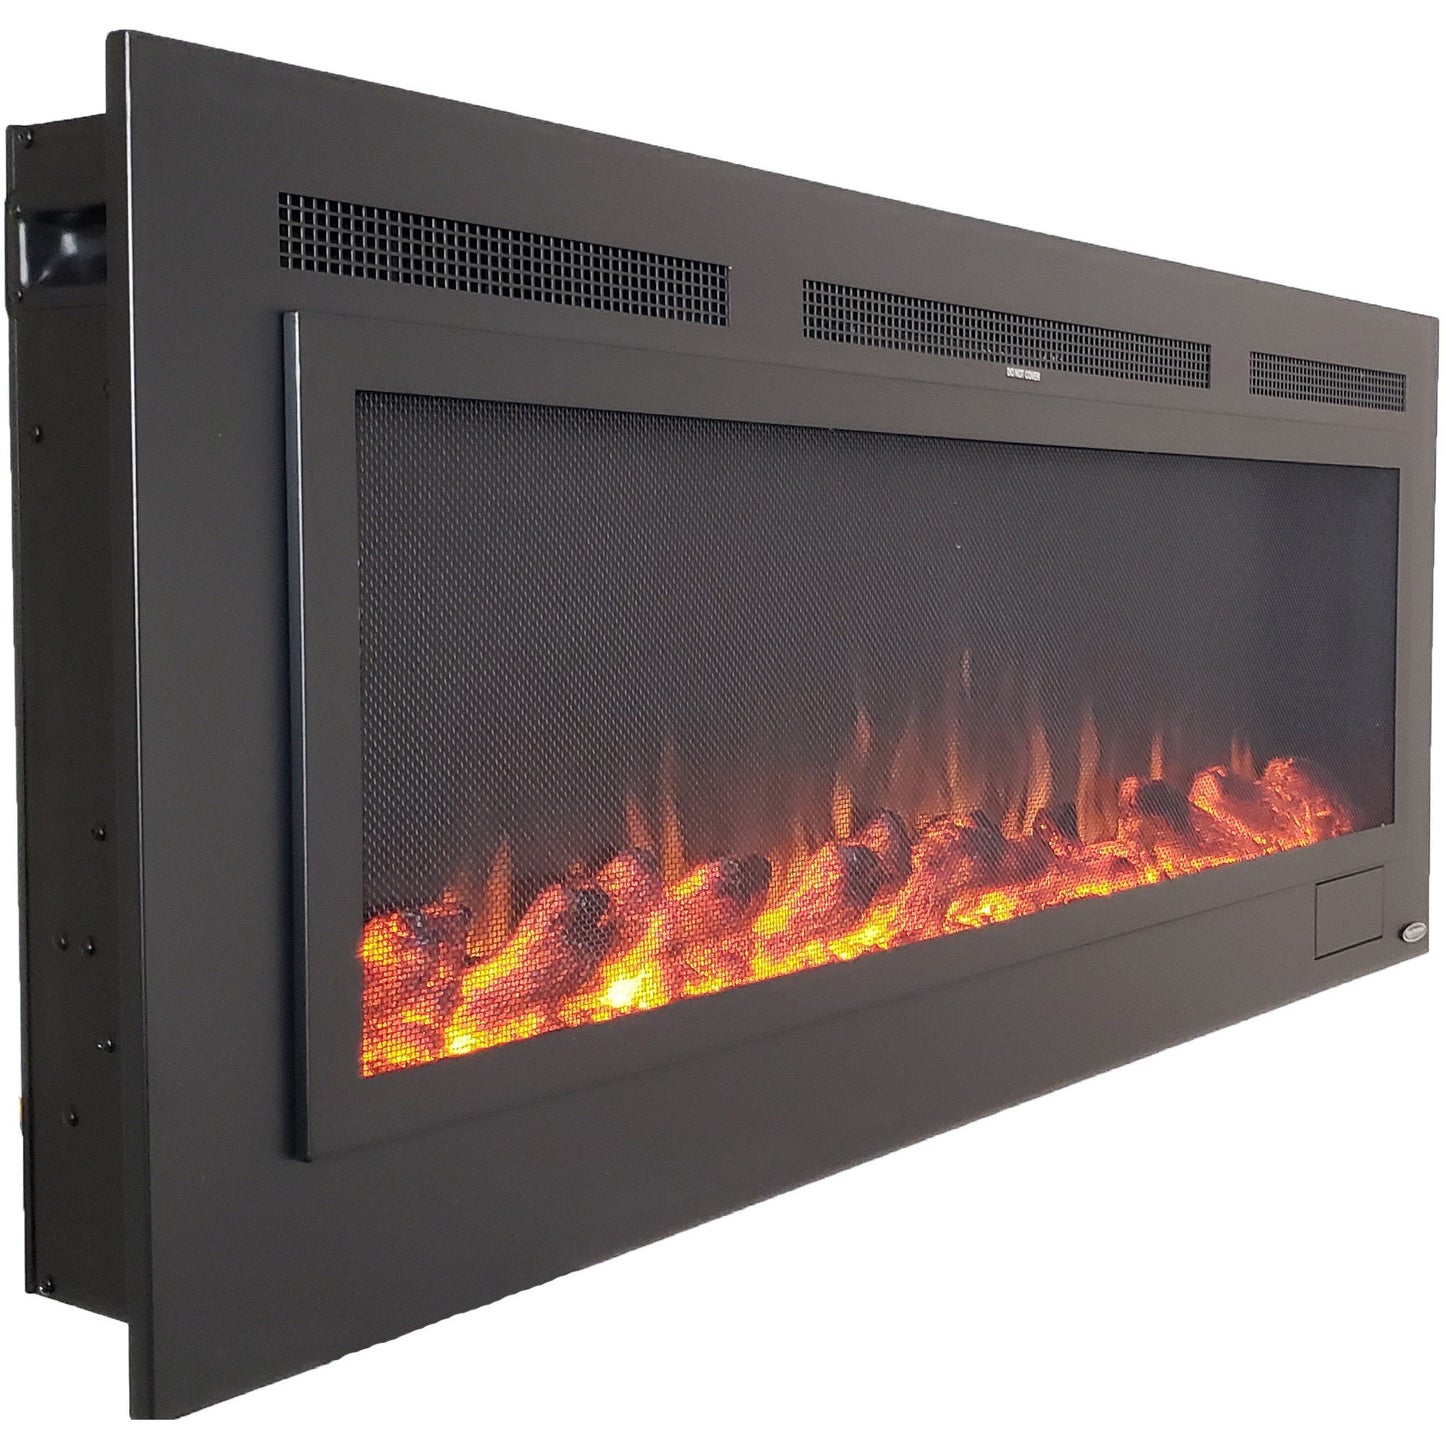 Touchstone Sideline 50" Steel Recessed or Mounted Electric Fireplace